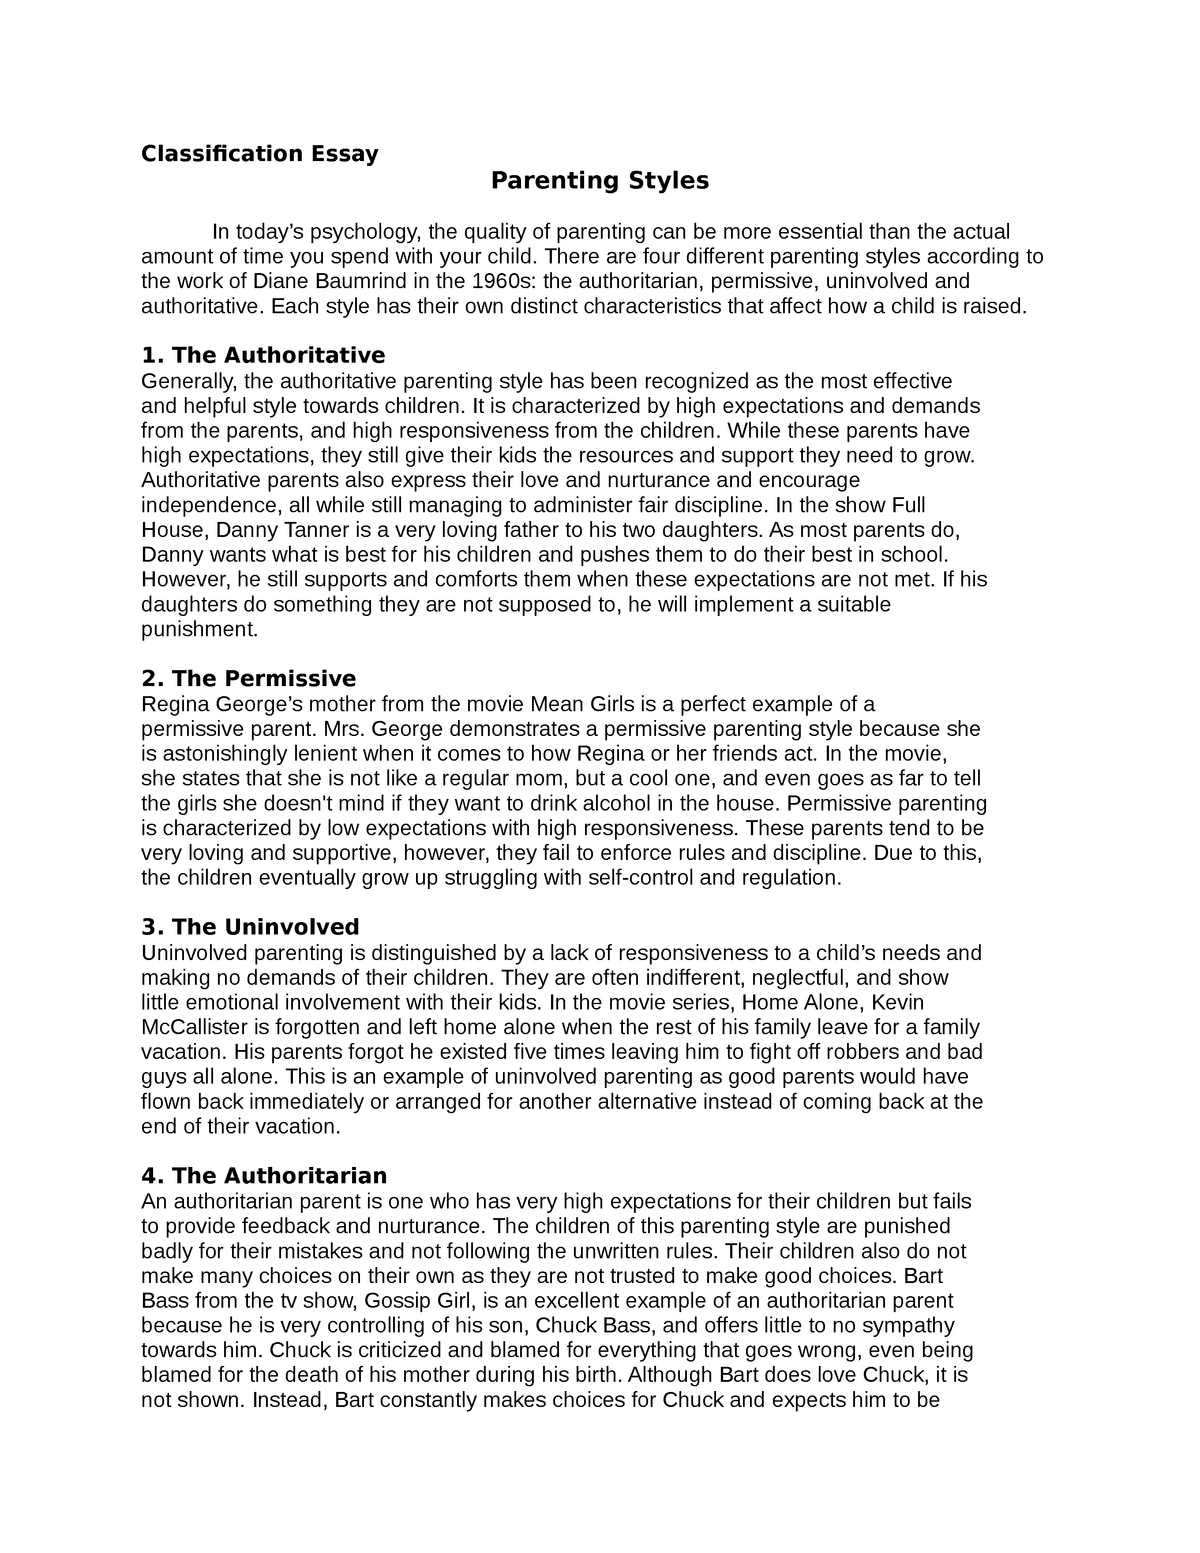 parenting styles classification essay